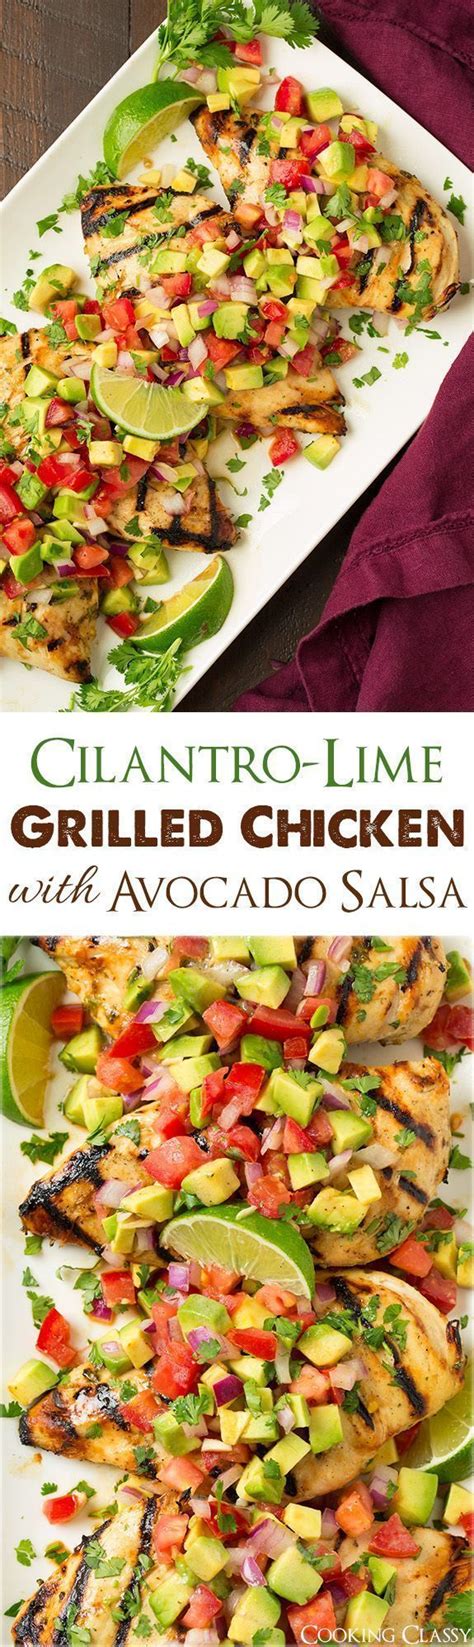 Not everyone likes cilantro though, so if that's you, change it up a bit and try adding grated. Grilled Cilantro Lime Chicken with Avocado Salsa - easy to ...